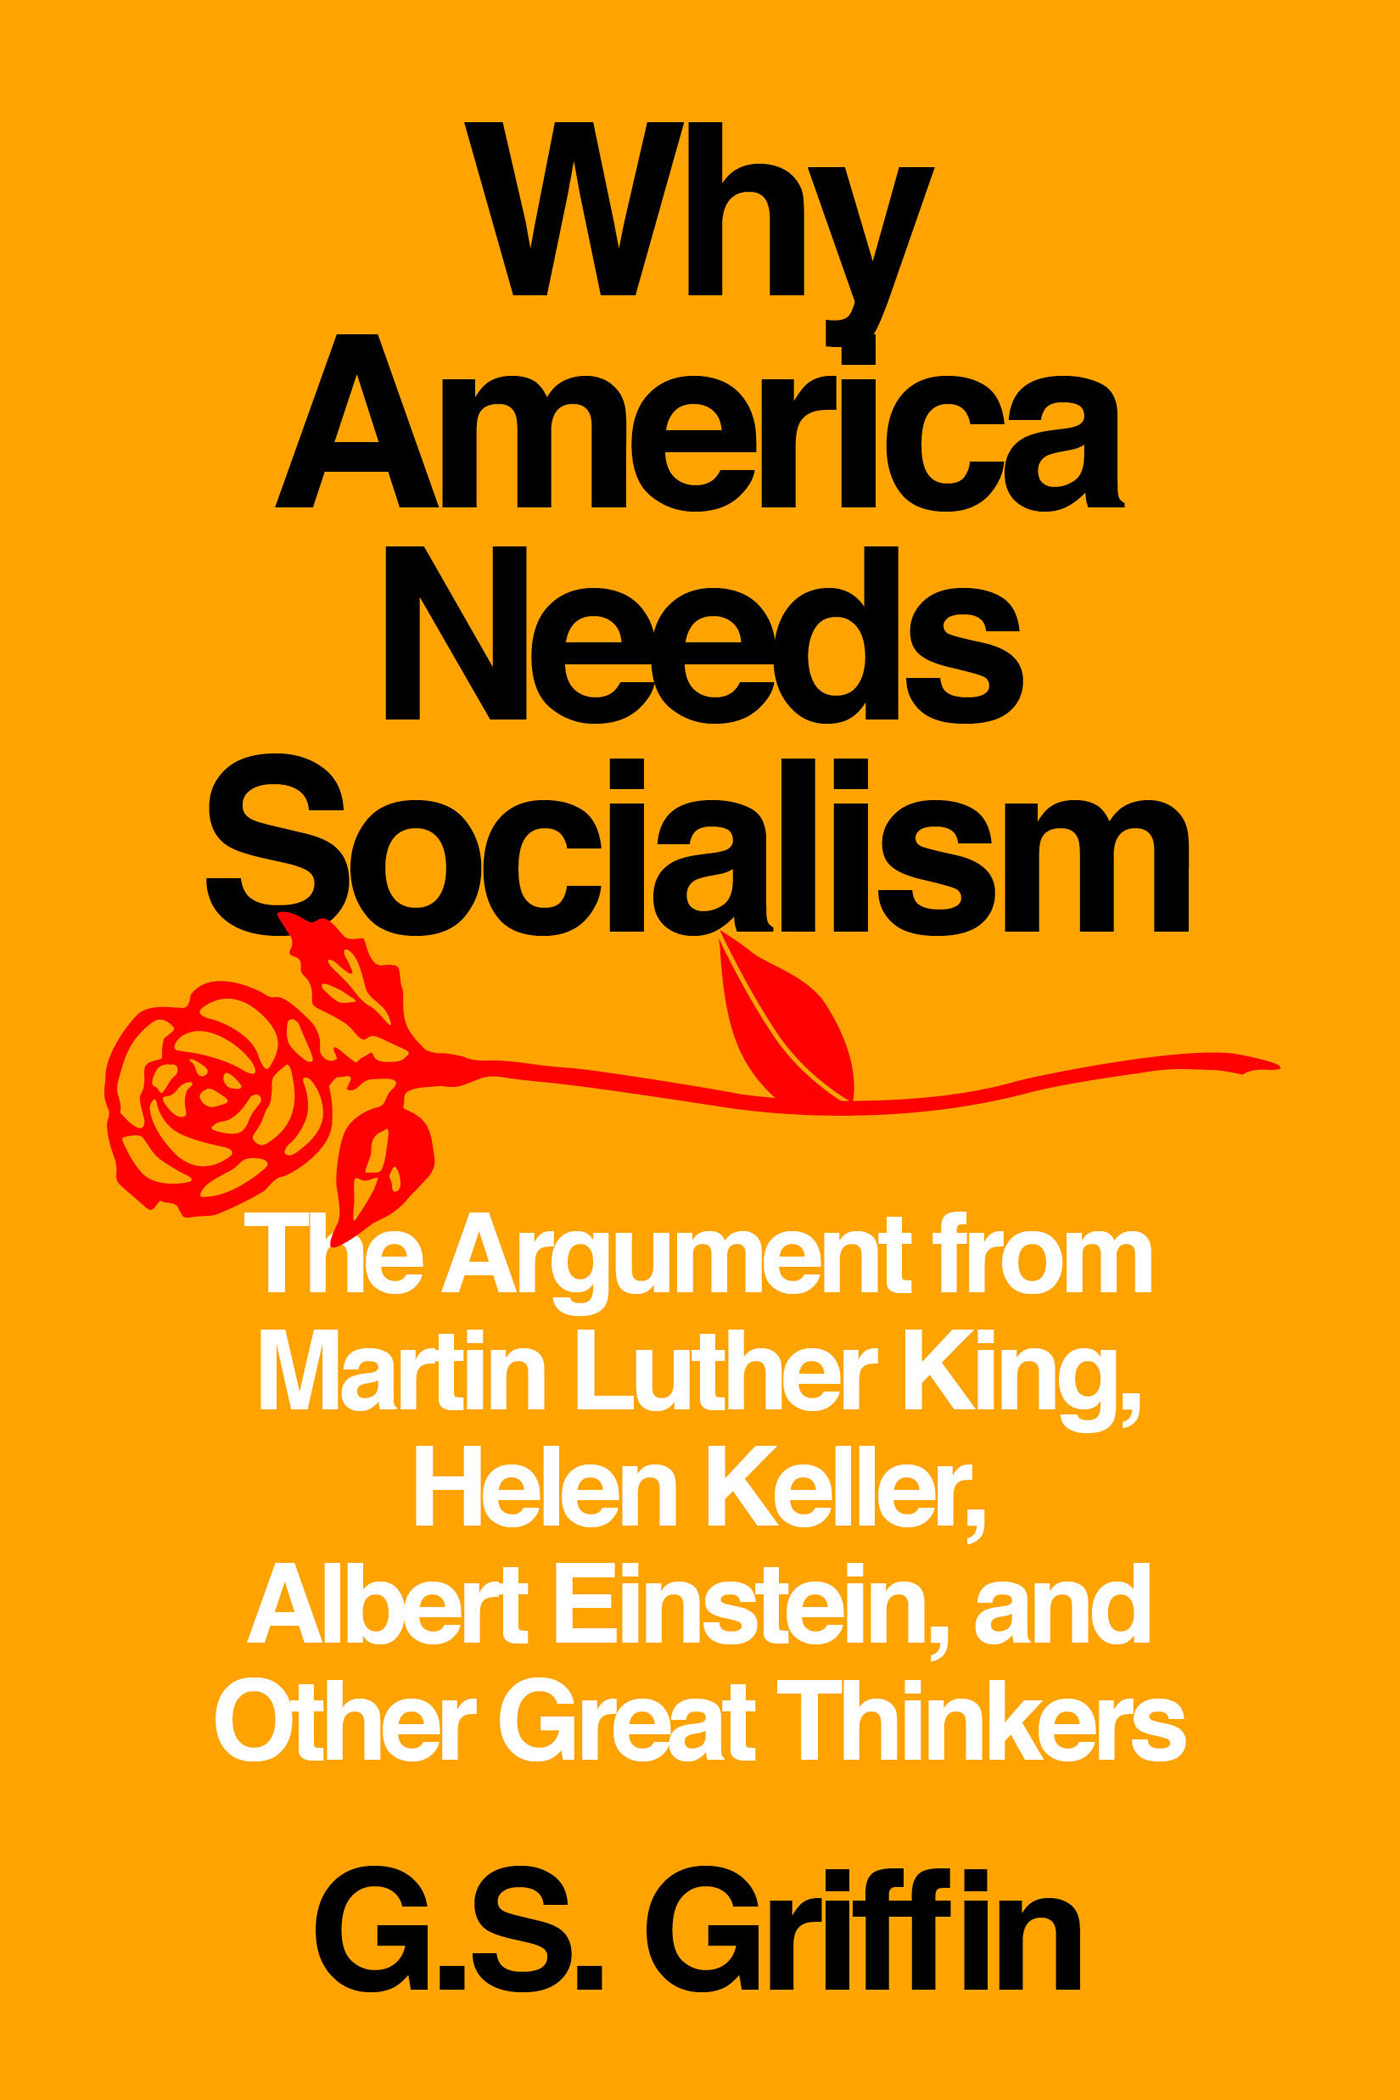 Why America needs socialism the argument from martin luther king helen keller albert einstein and other great thinkers - image 1